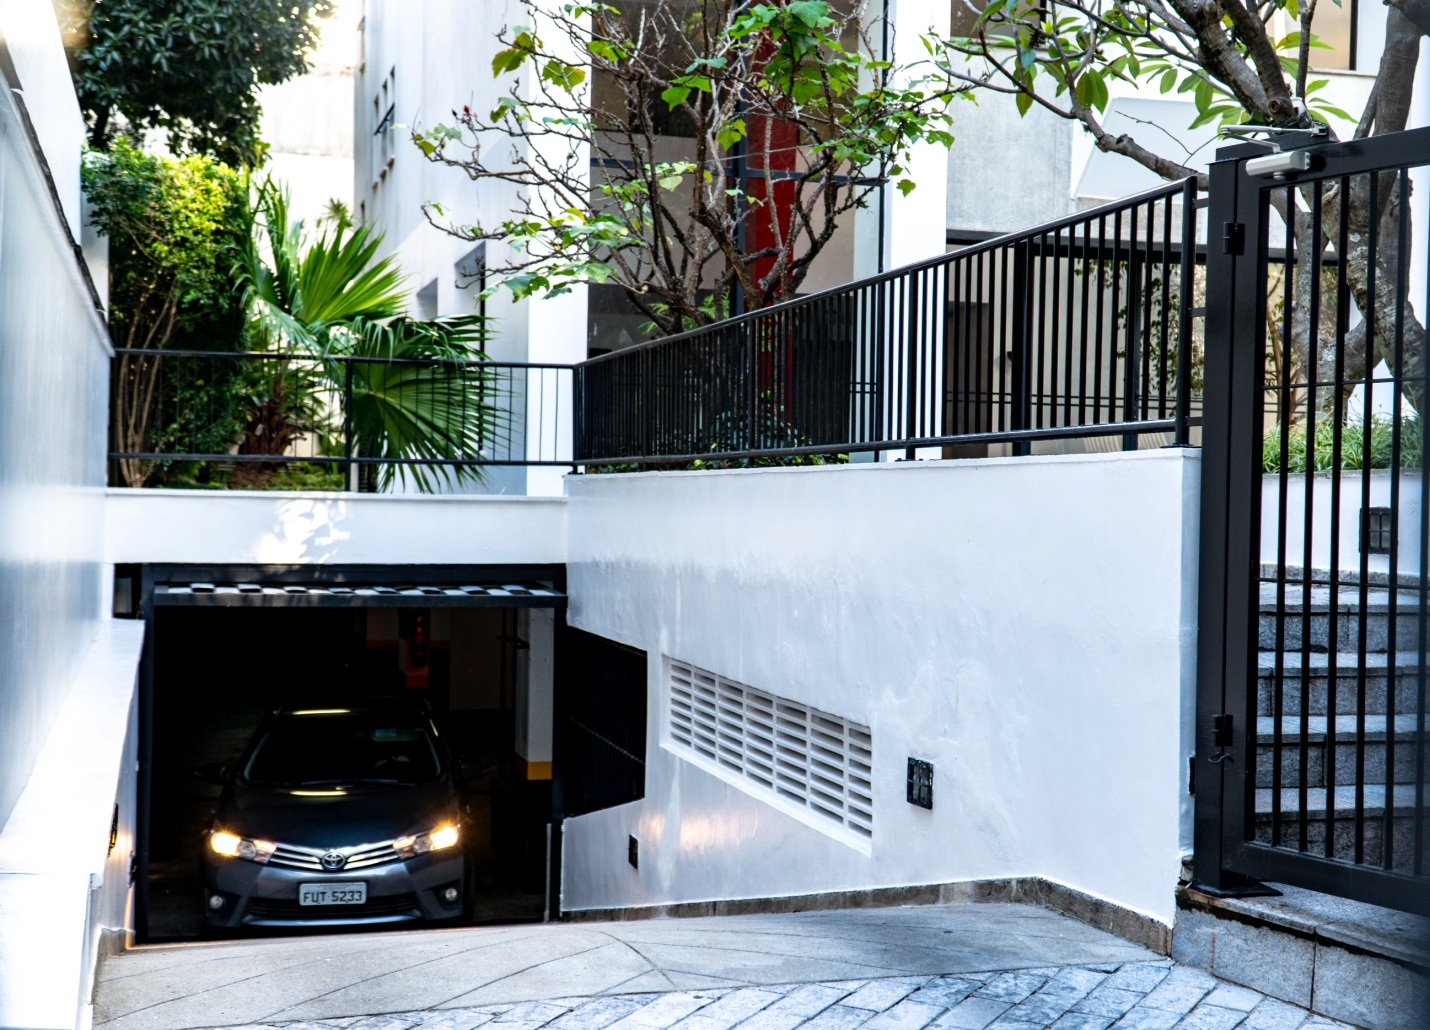 A car rolling out of an underground garage